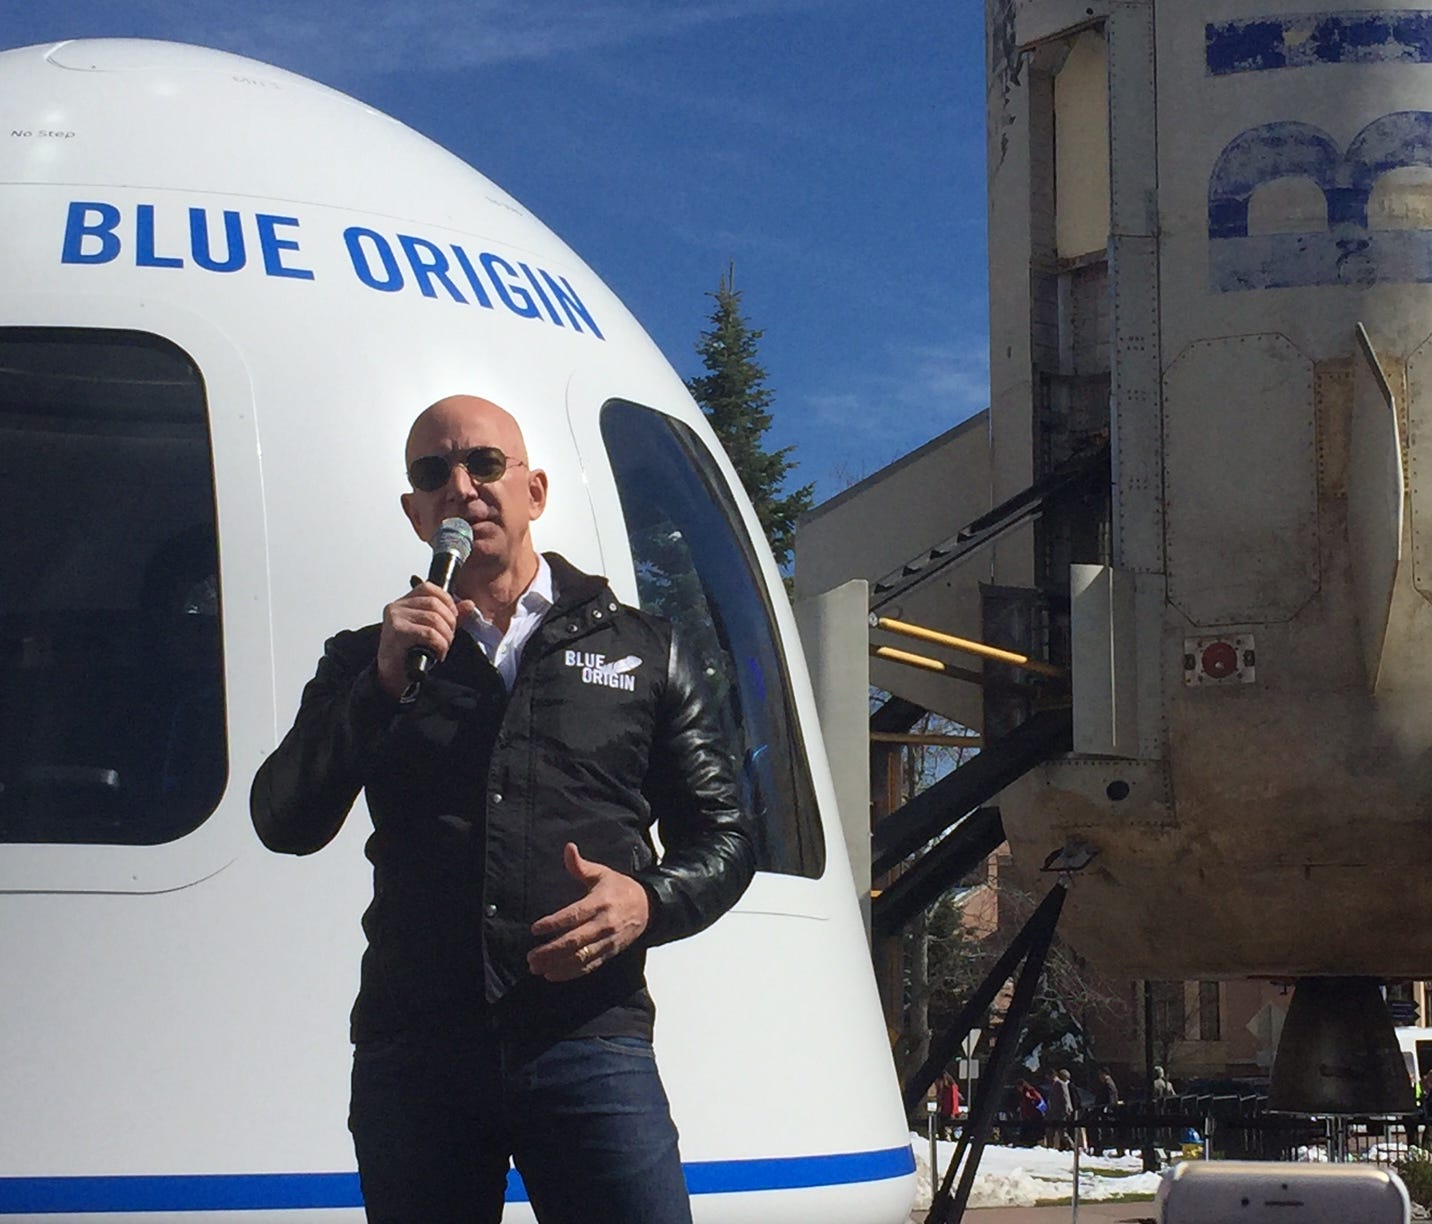 Amazon.com CEO and Blue Origin founder Jeff Bezos discussed his plans for flying people in space and lowering launch costs in a Wednesday appearance at the 33rd Space Symposium in Colorado Springs.